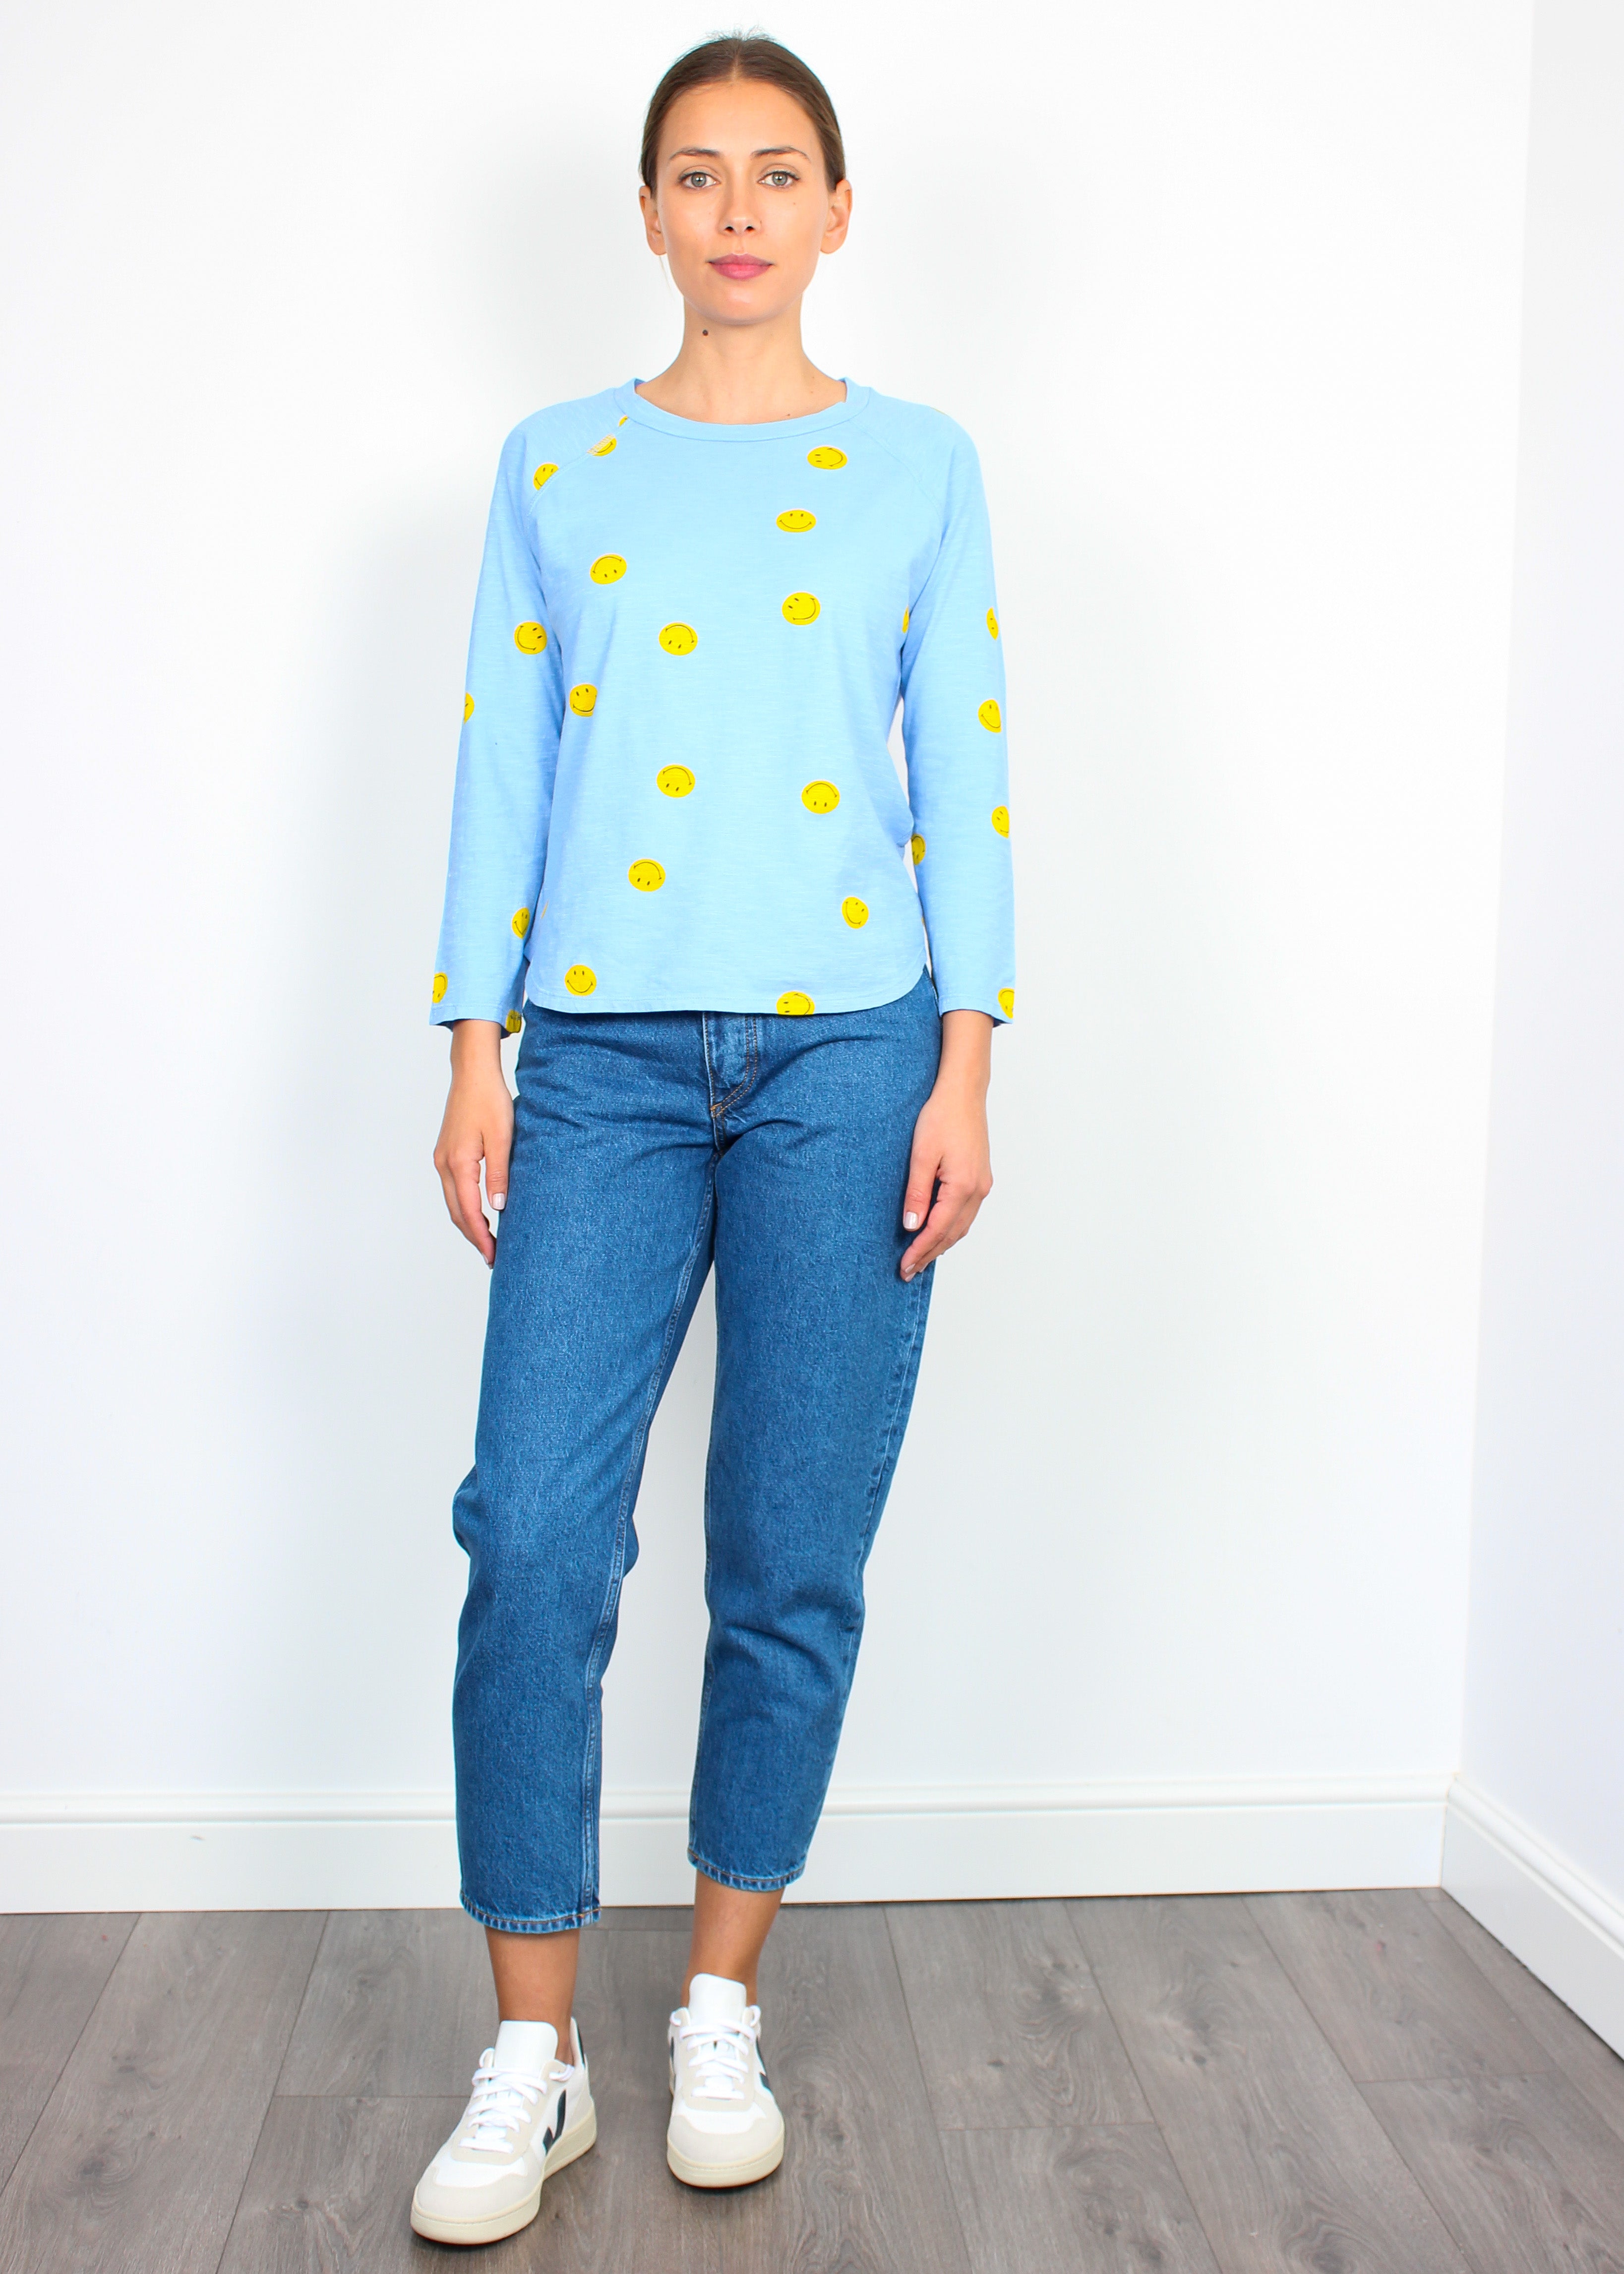 JU All Over Smiley Long Sleeve T-shirt in Blue